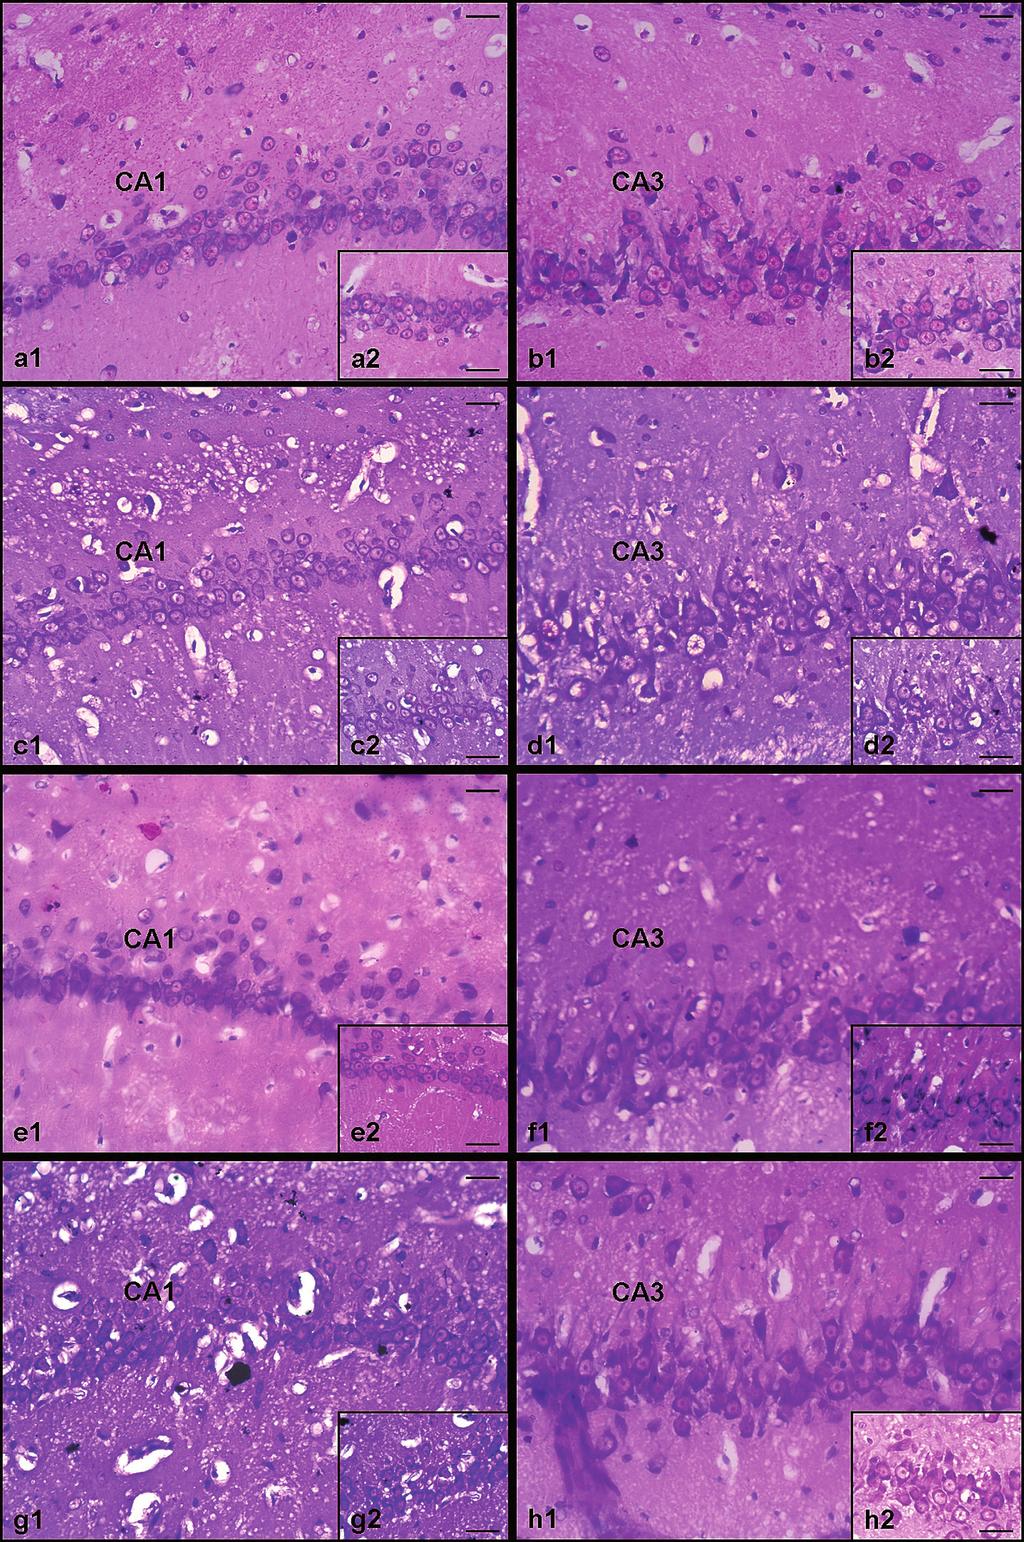 Adv Clin Exp Med. 2017;26(1):23 29 27 Fig. 1. CA1 and CA3 hippocampal regions were stained with Cresyl violet stain (x 40 and x 100 magnification).